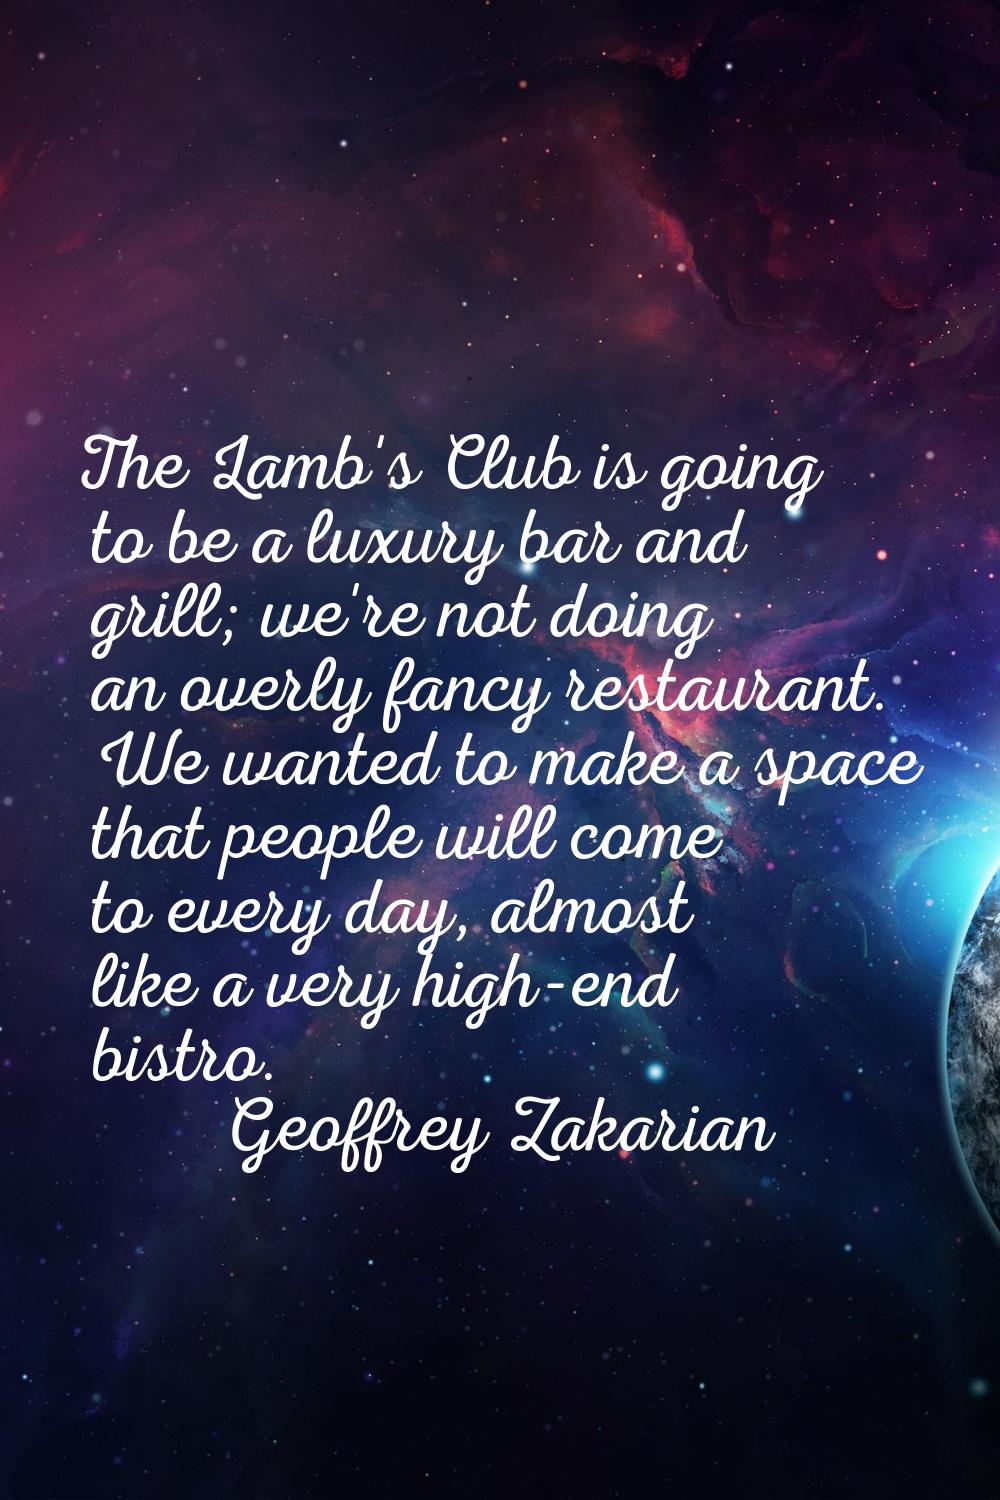 The Lamb's Club is going to be a luxury bar and grill; we're not doing an overly fancy restaurant. 